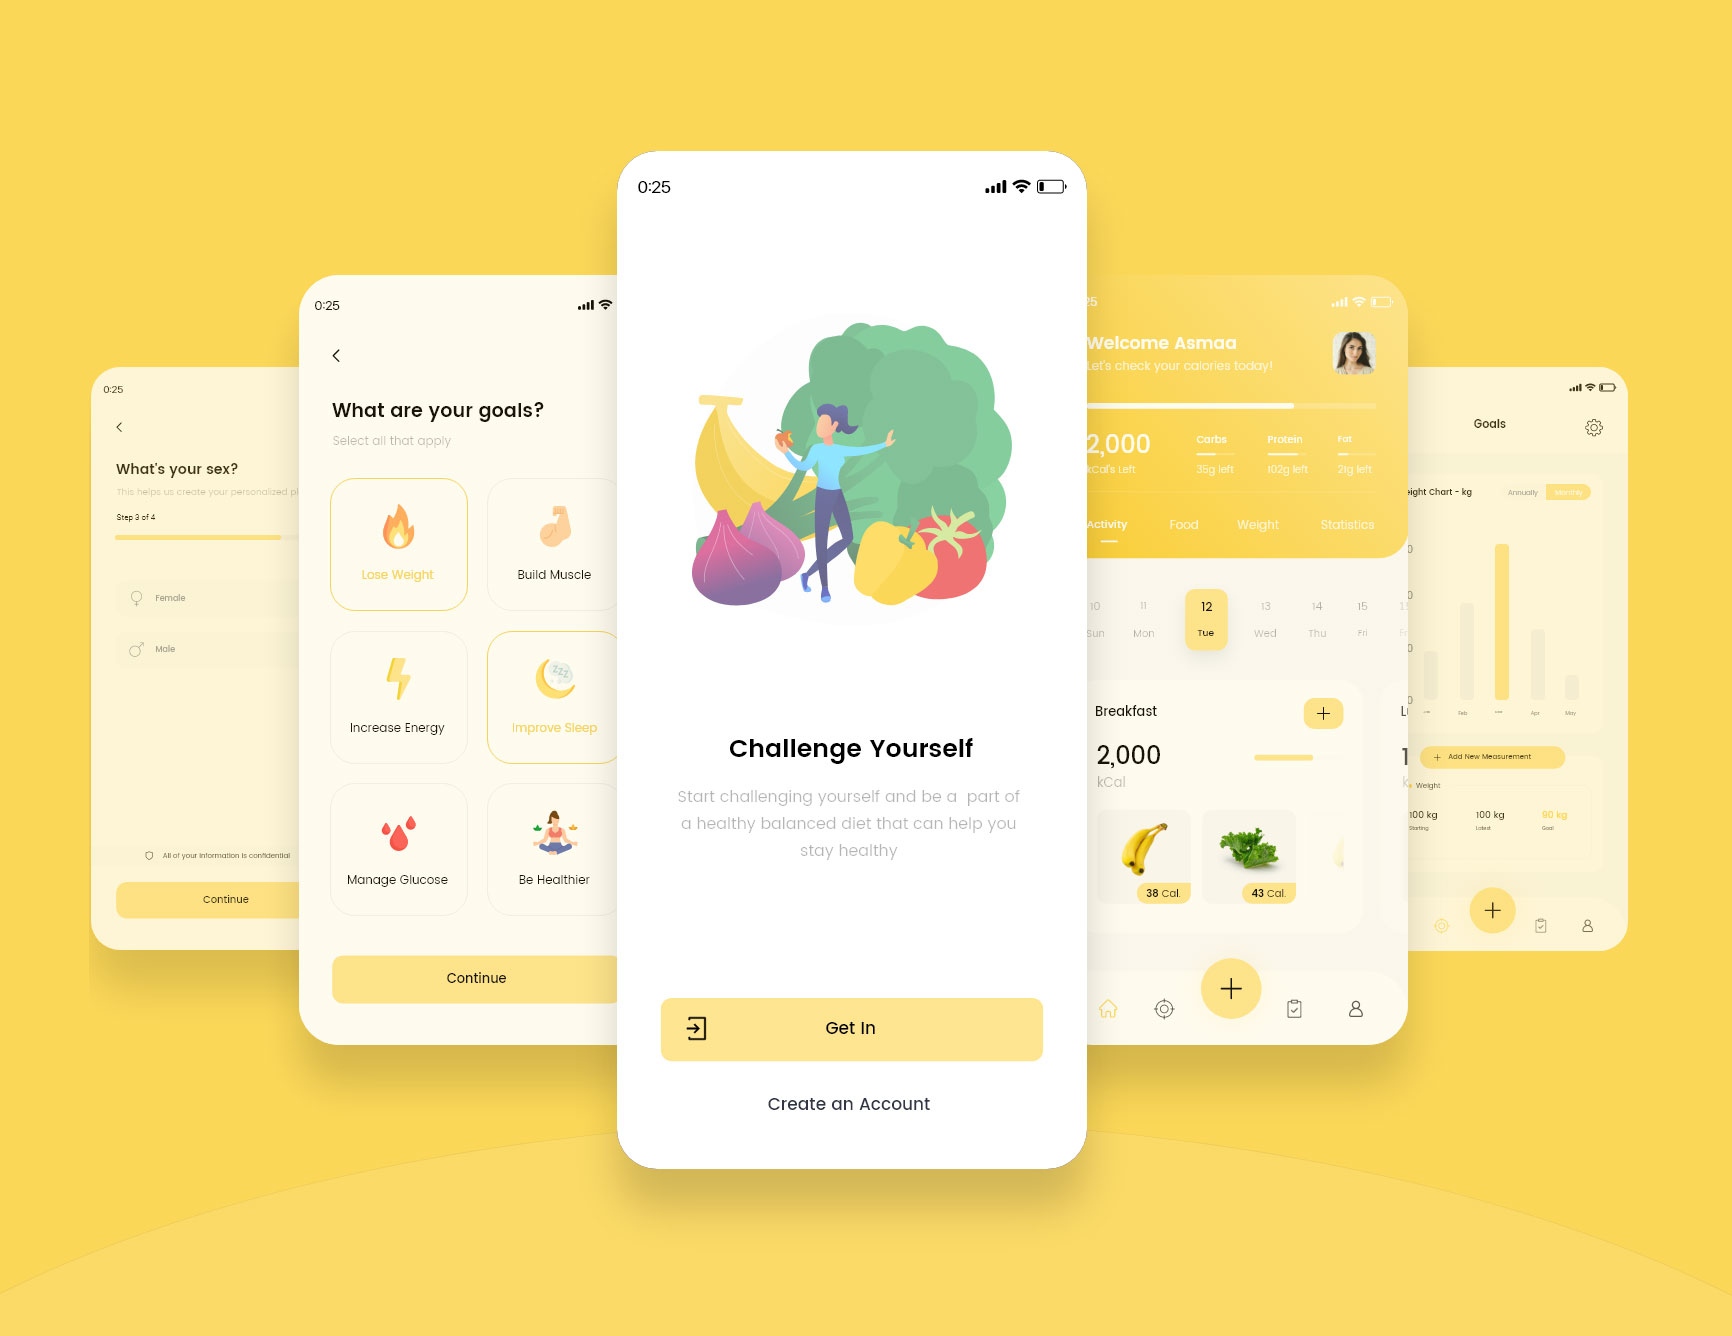 Free Calorie Counter XD App Template - Free Adobe Xd File